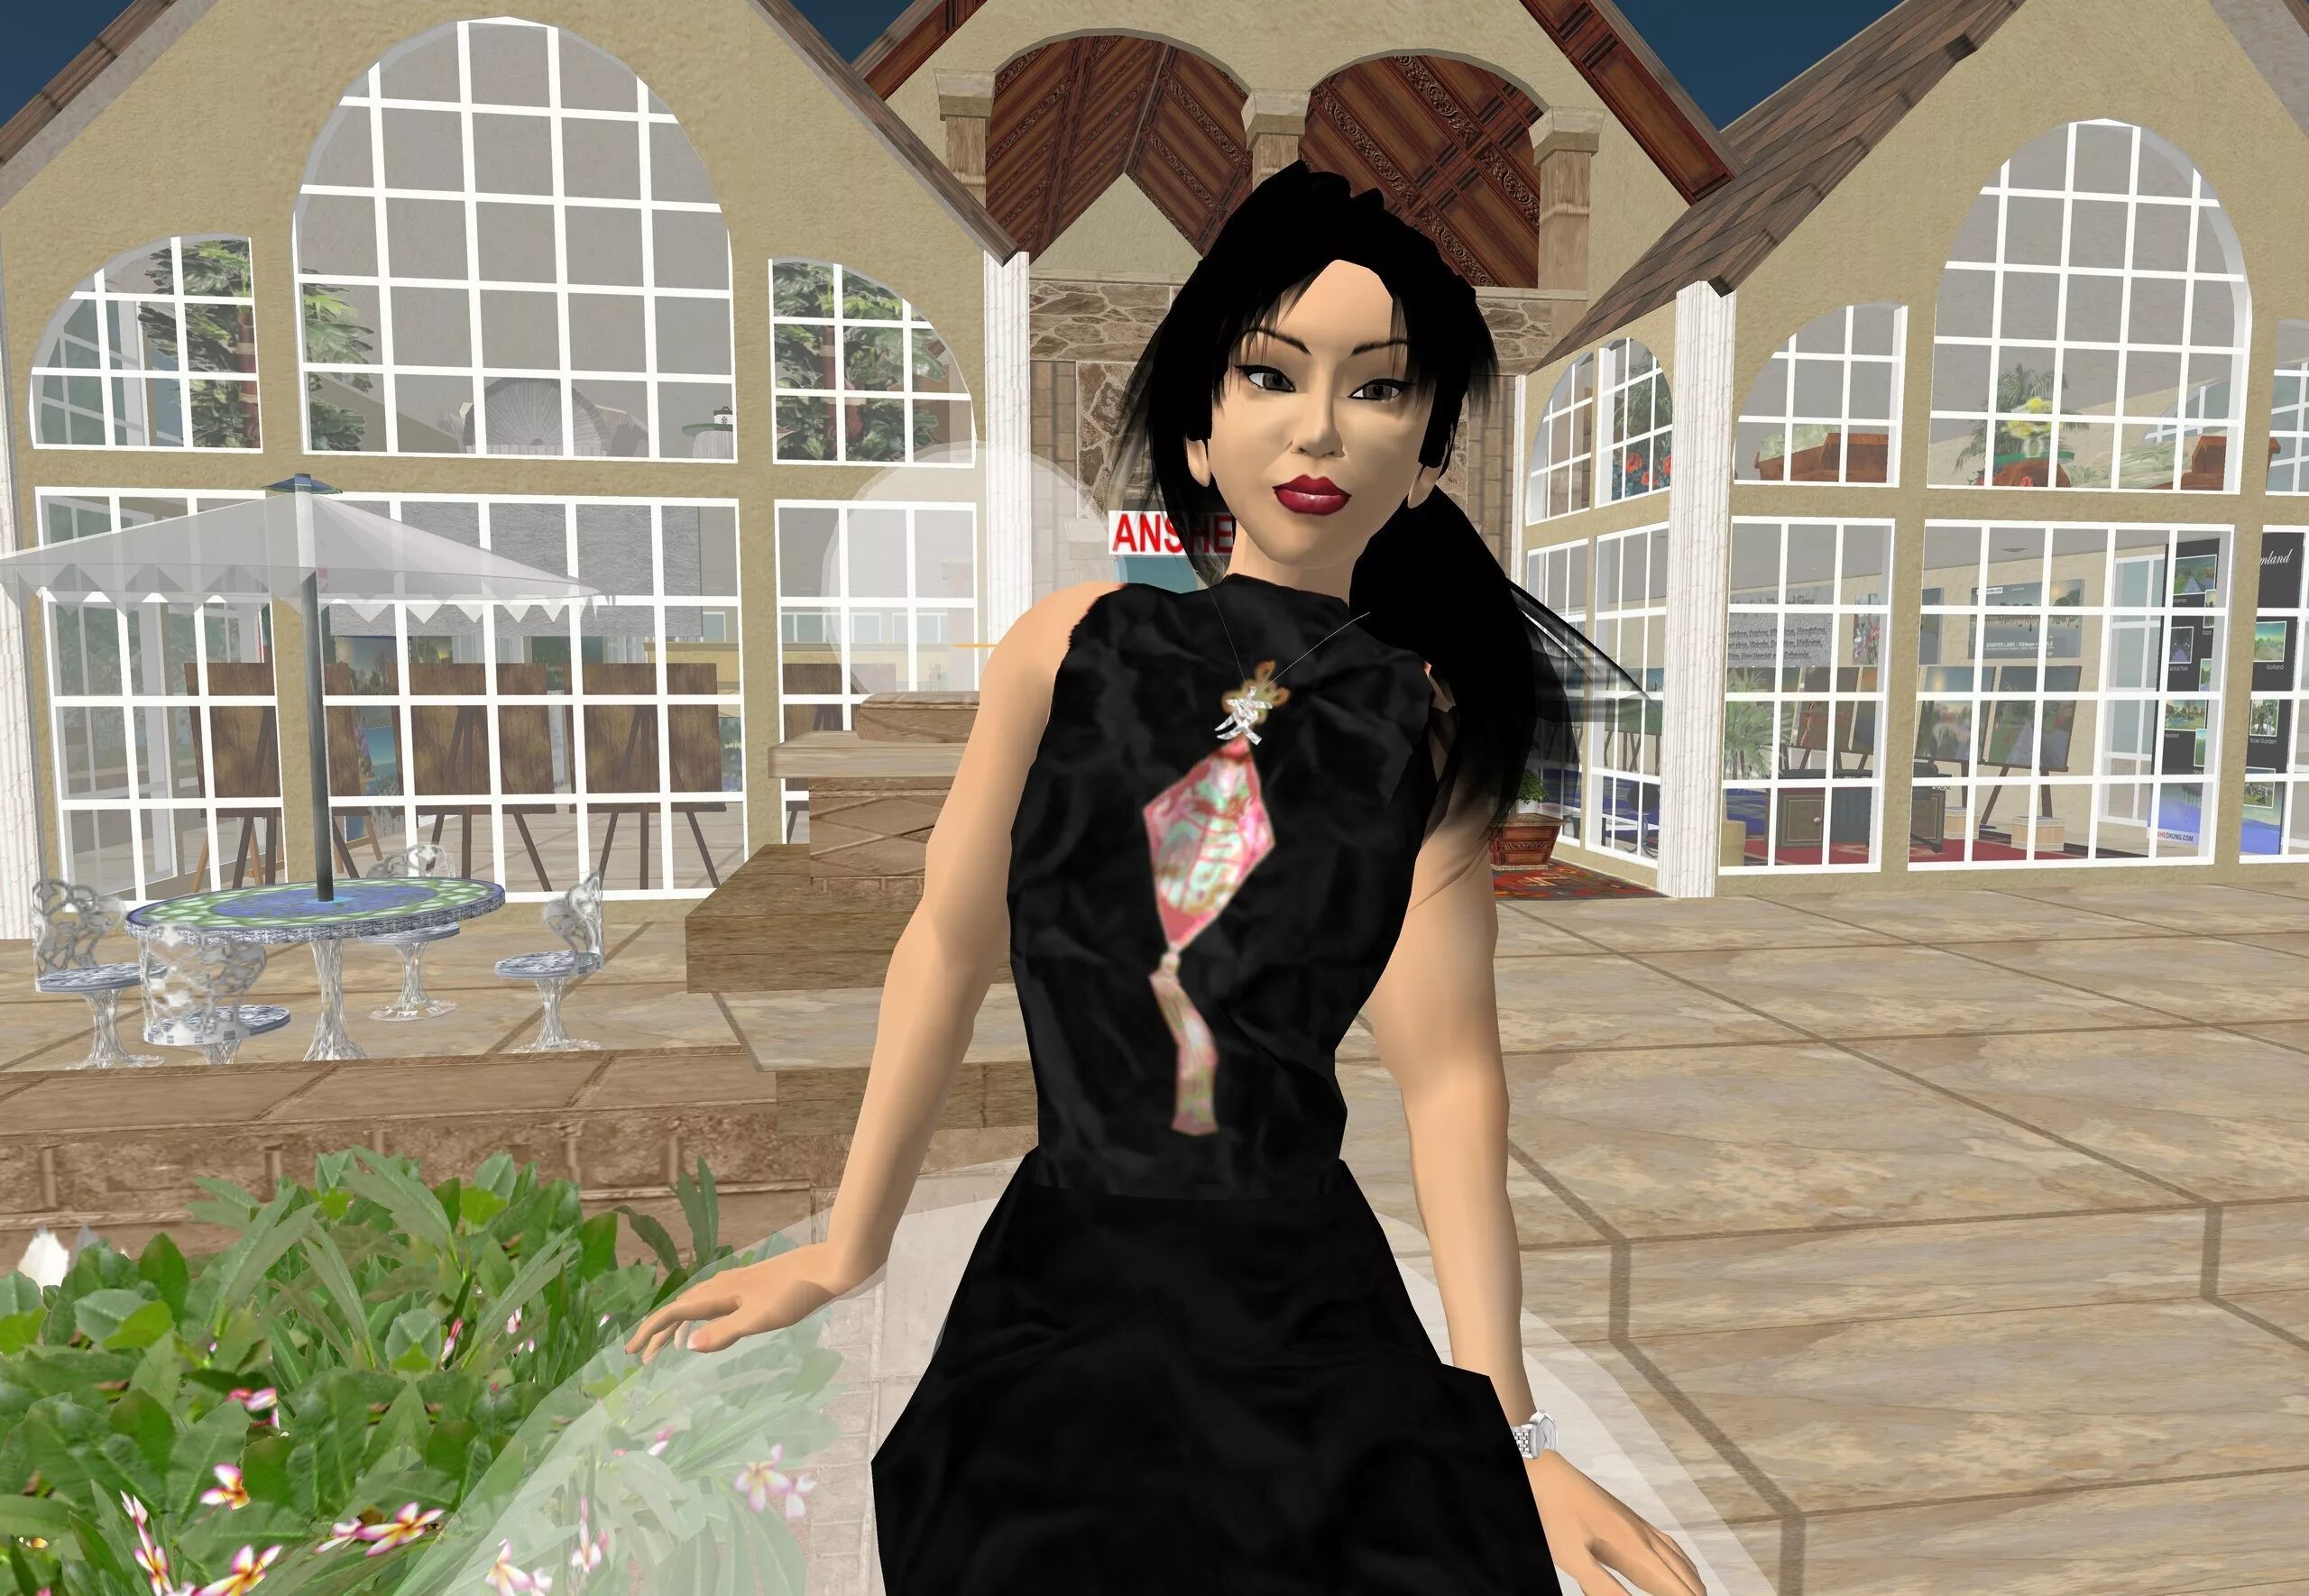 Second life me. Anshe chung. Second Life. Second Life игра. Second Life 2.